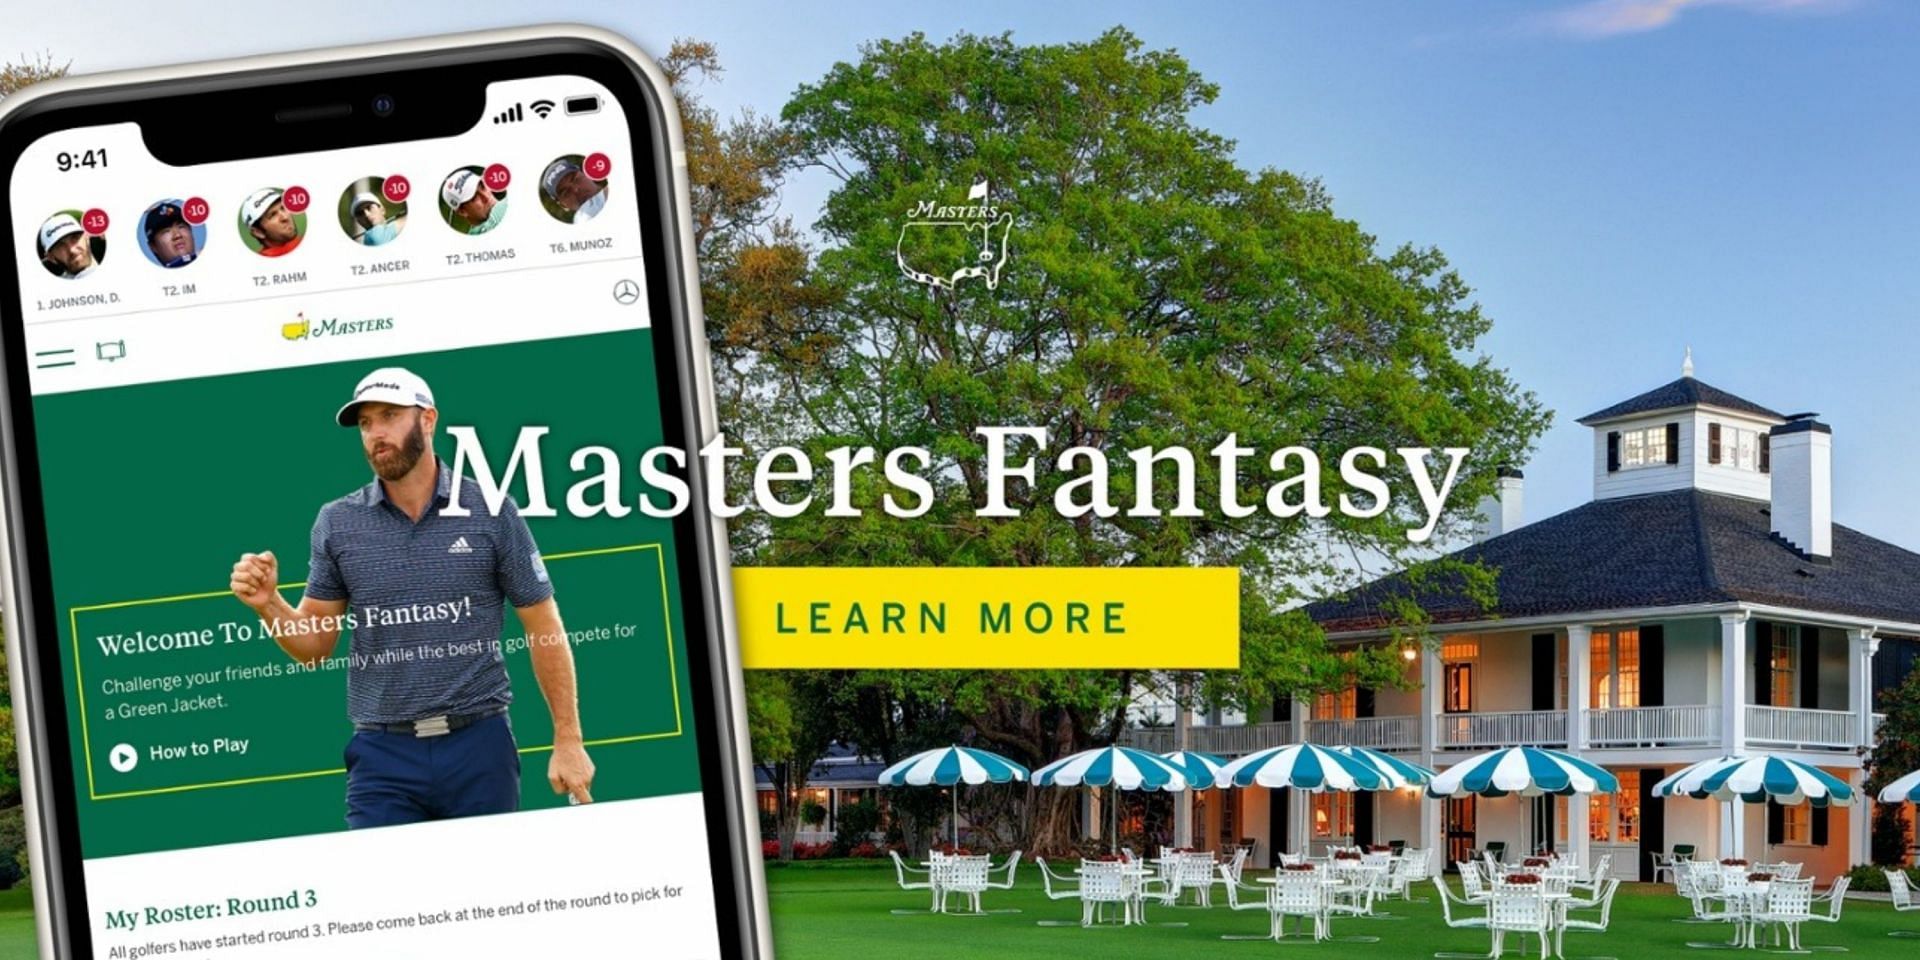 Masters 2023: Qualifications, Invitees, Cut Rules, & Field